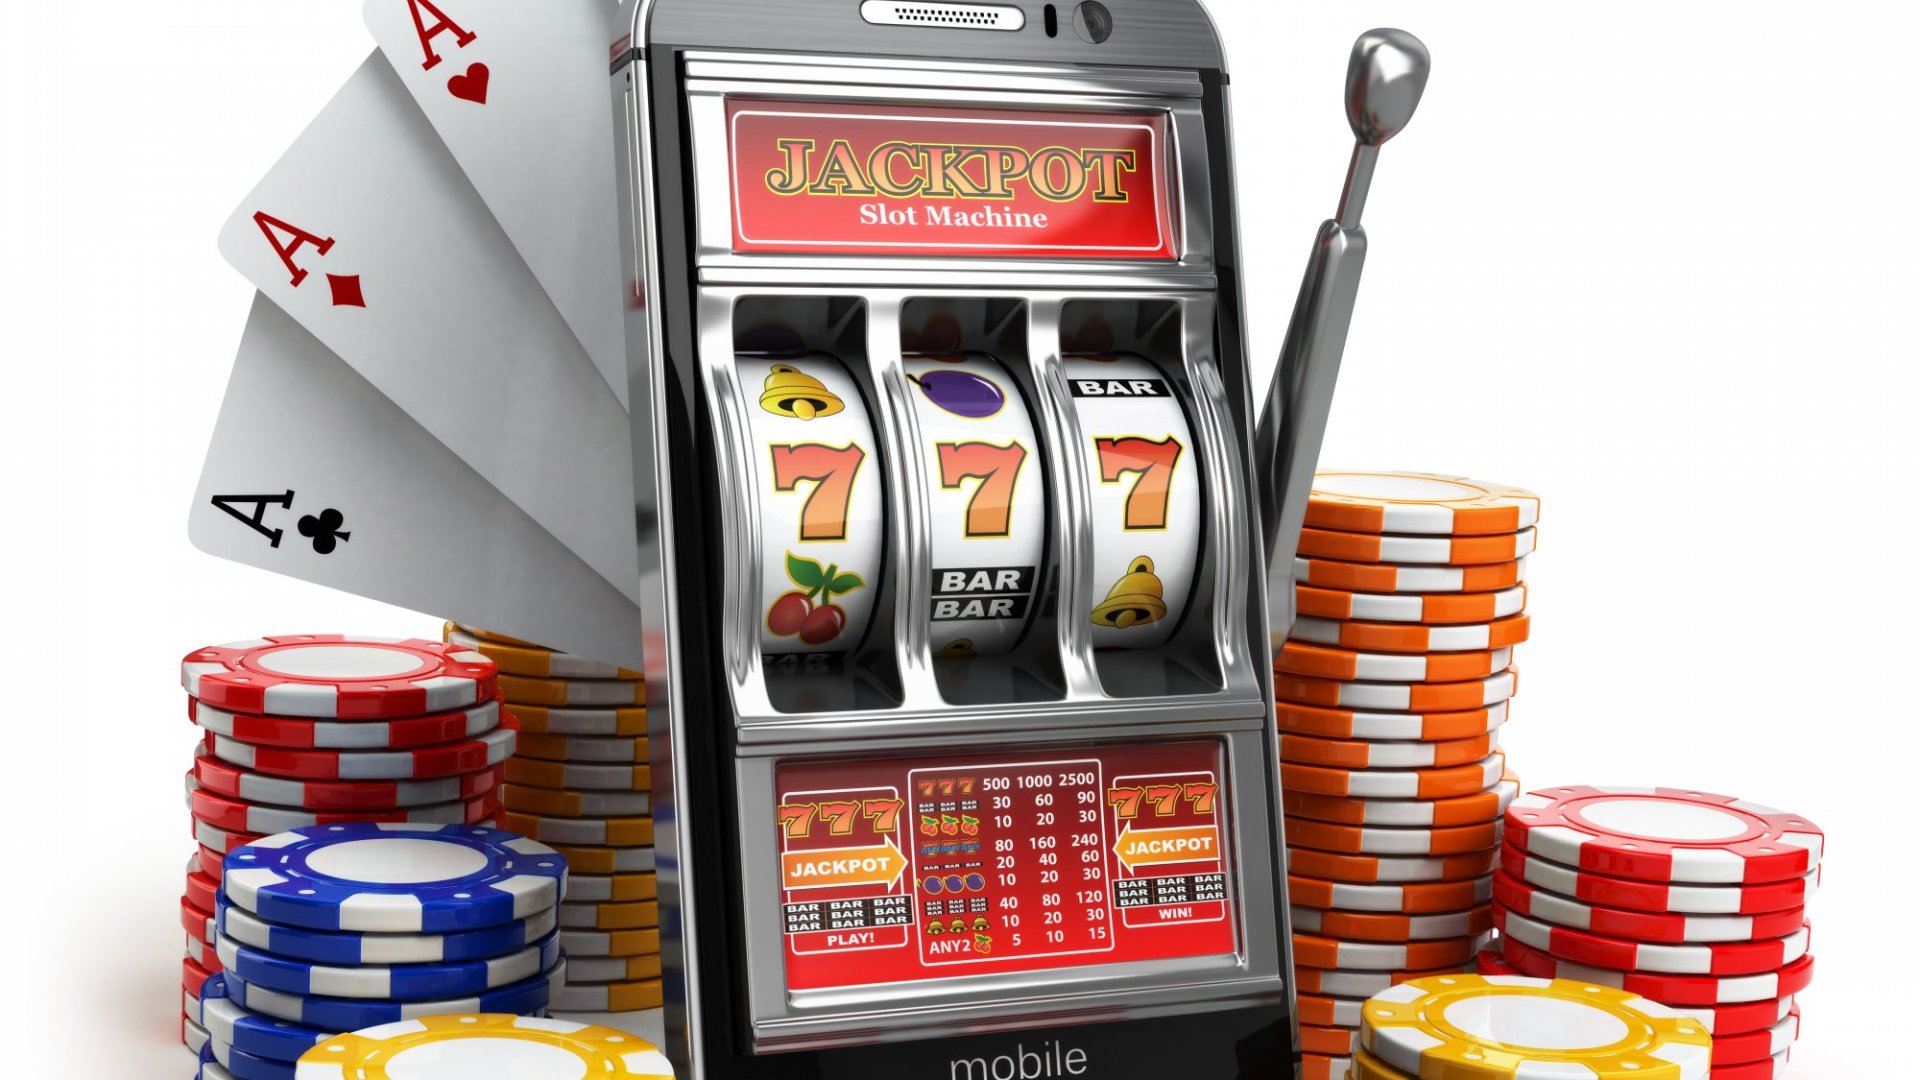 Play The Best Casino Games And Claim Huge Casino Bonuses At Bet365